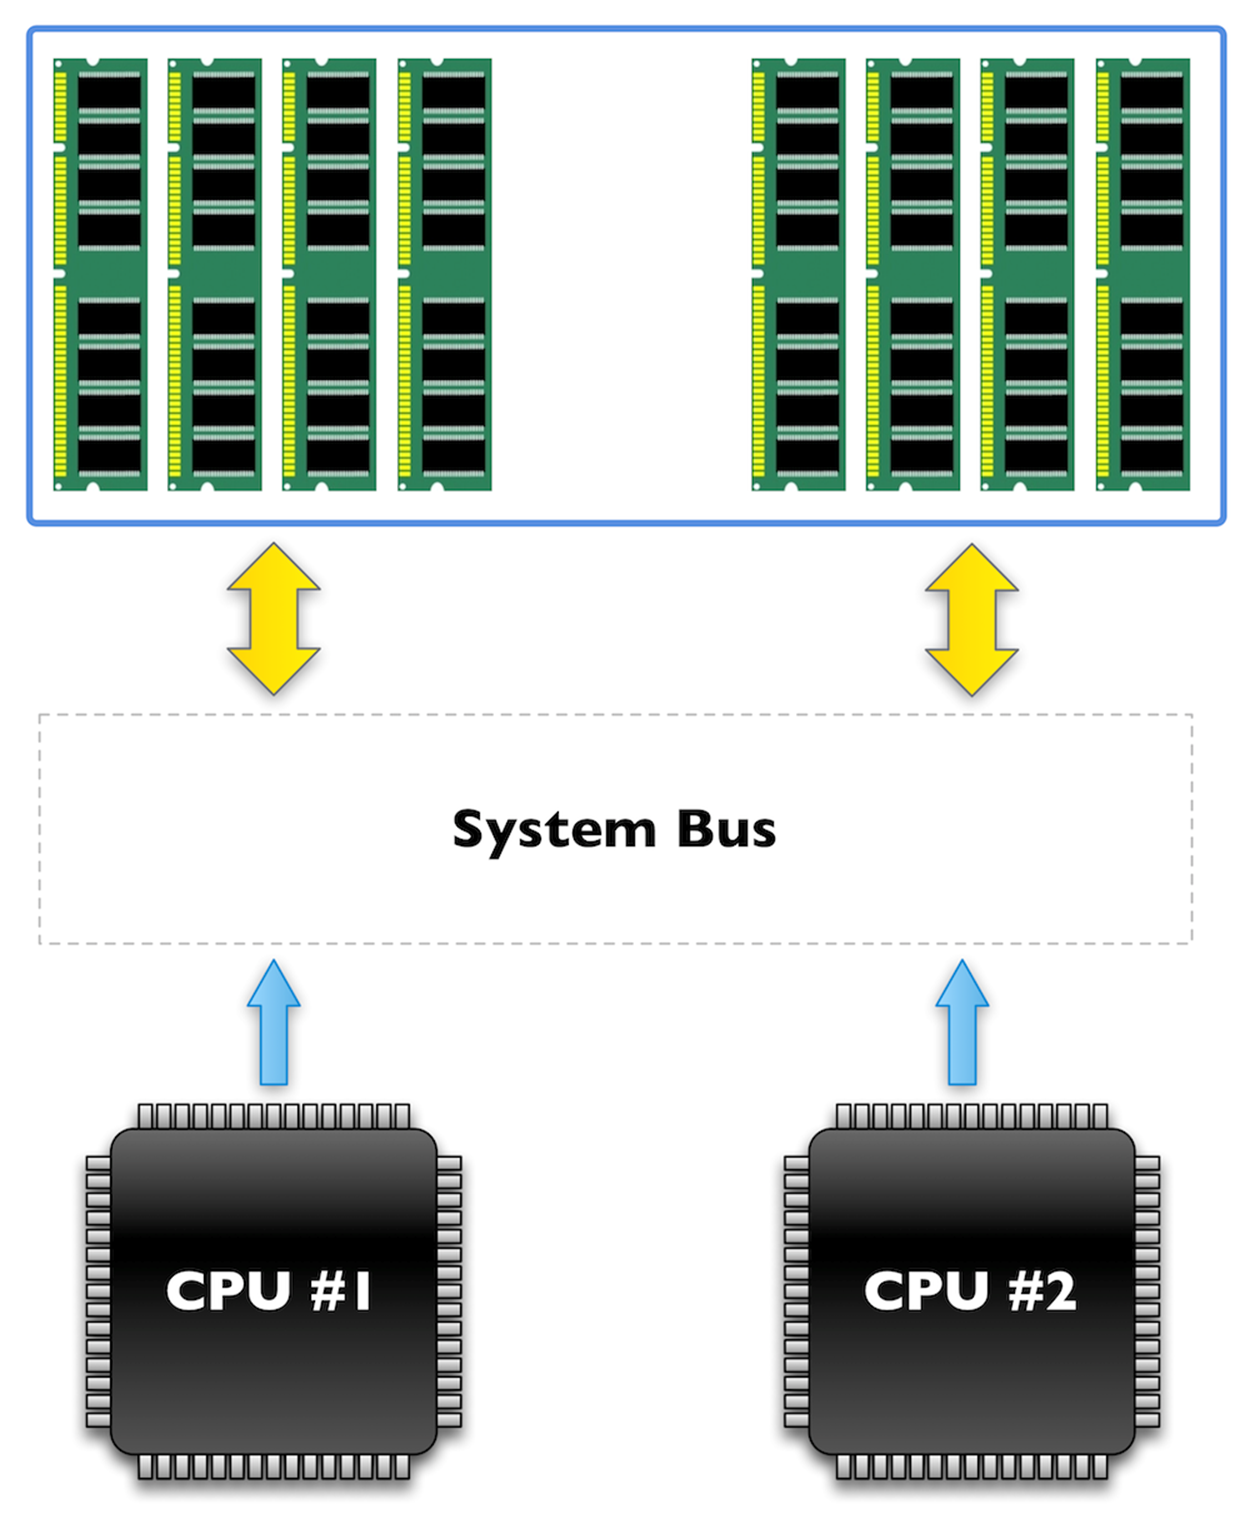 System architecture with SMP